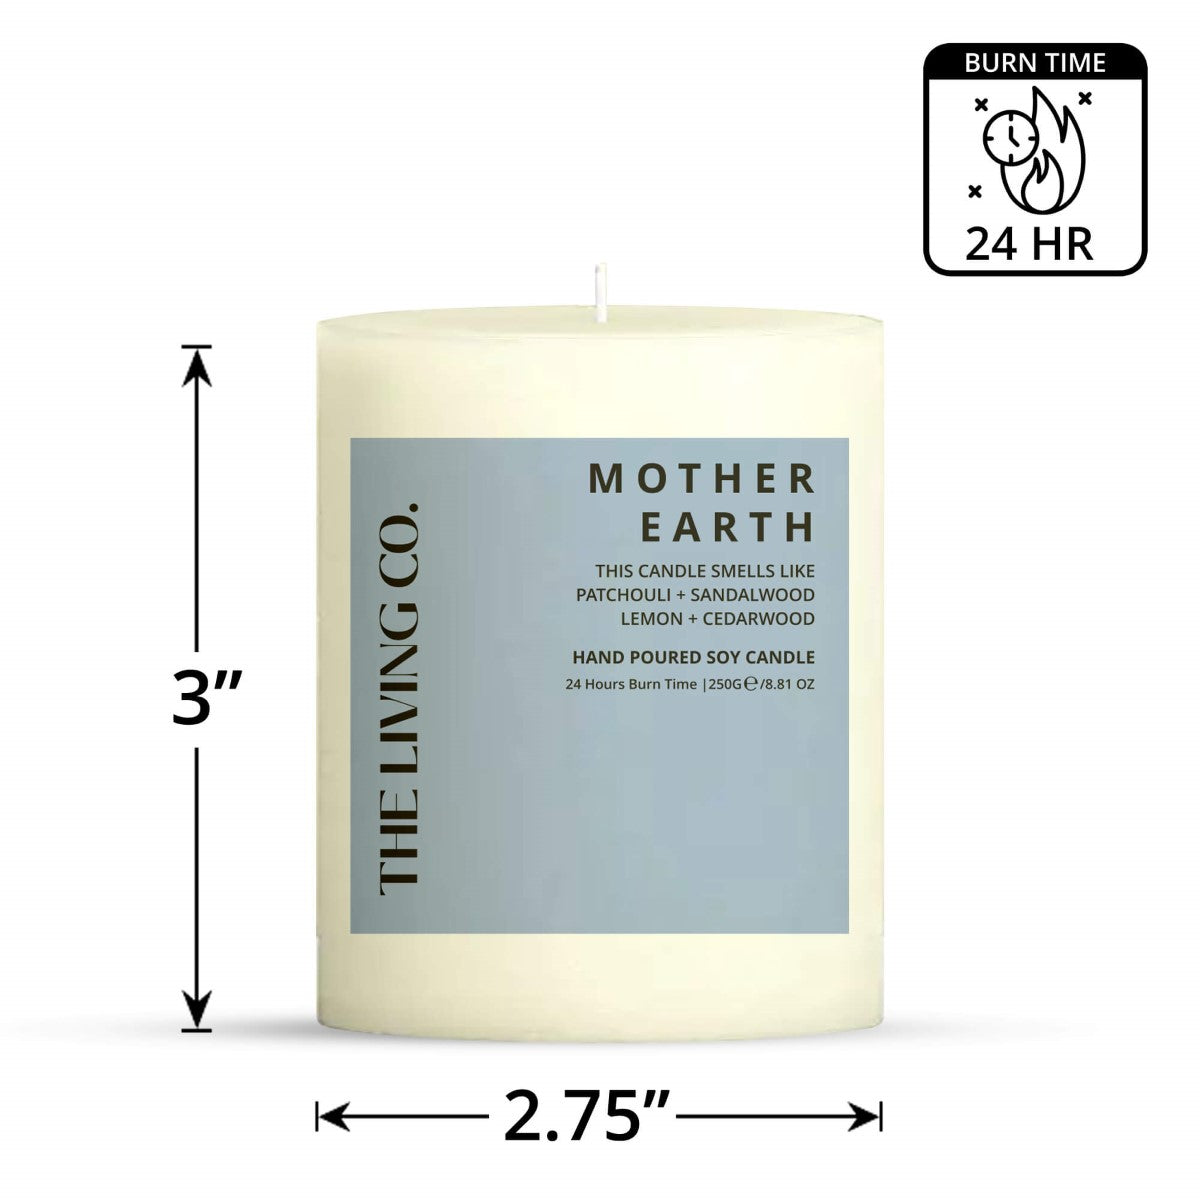 Mother Earth Hand Poured Scented Candle